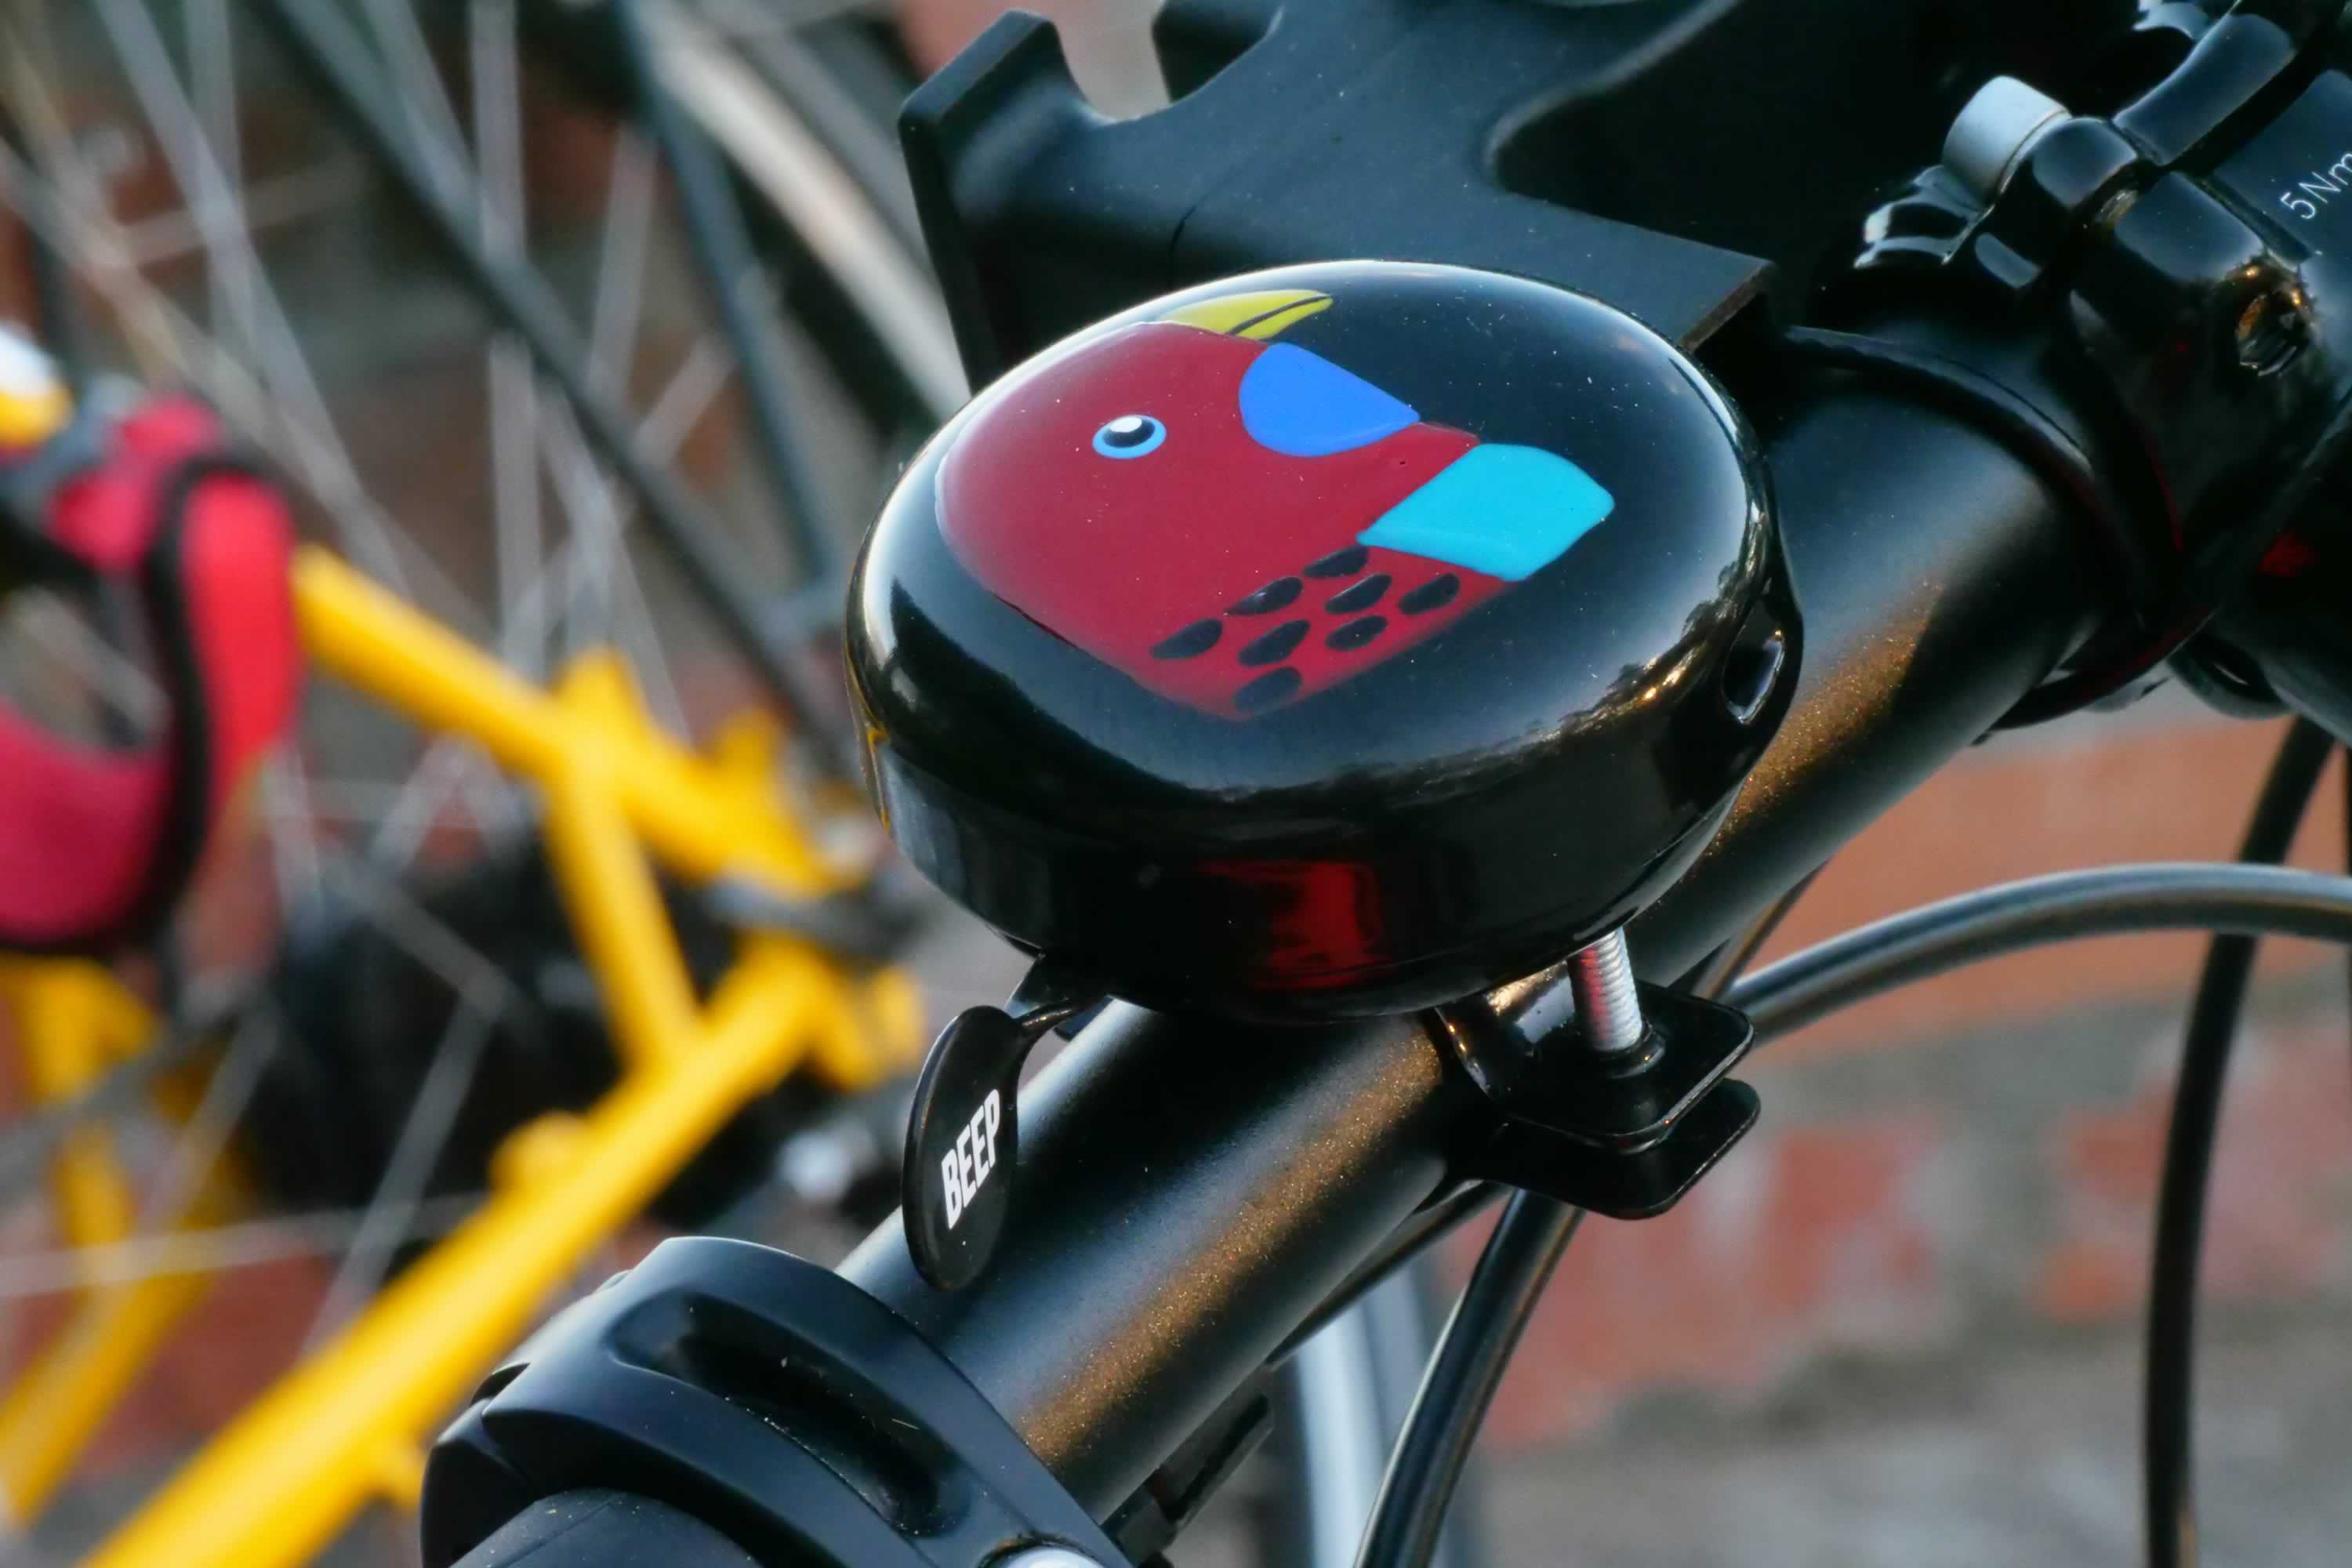 Rosella bicycle bell. Photo: Andrew Hughes.